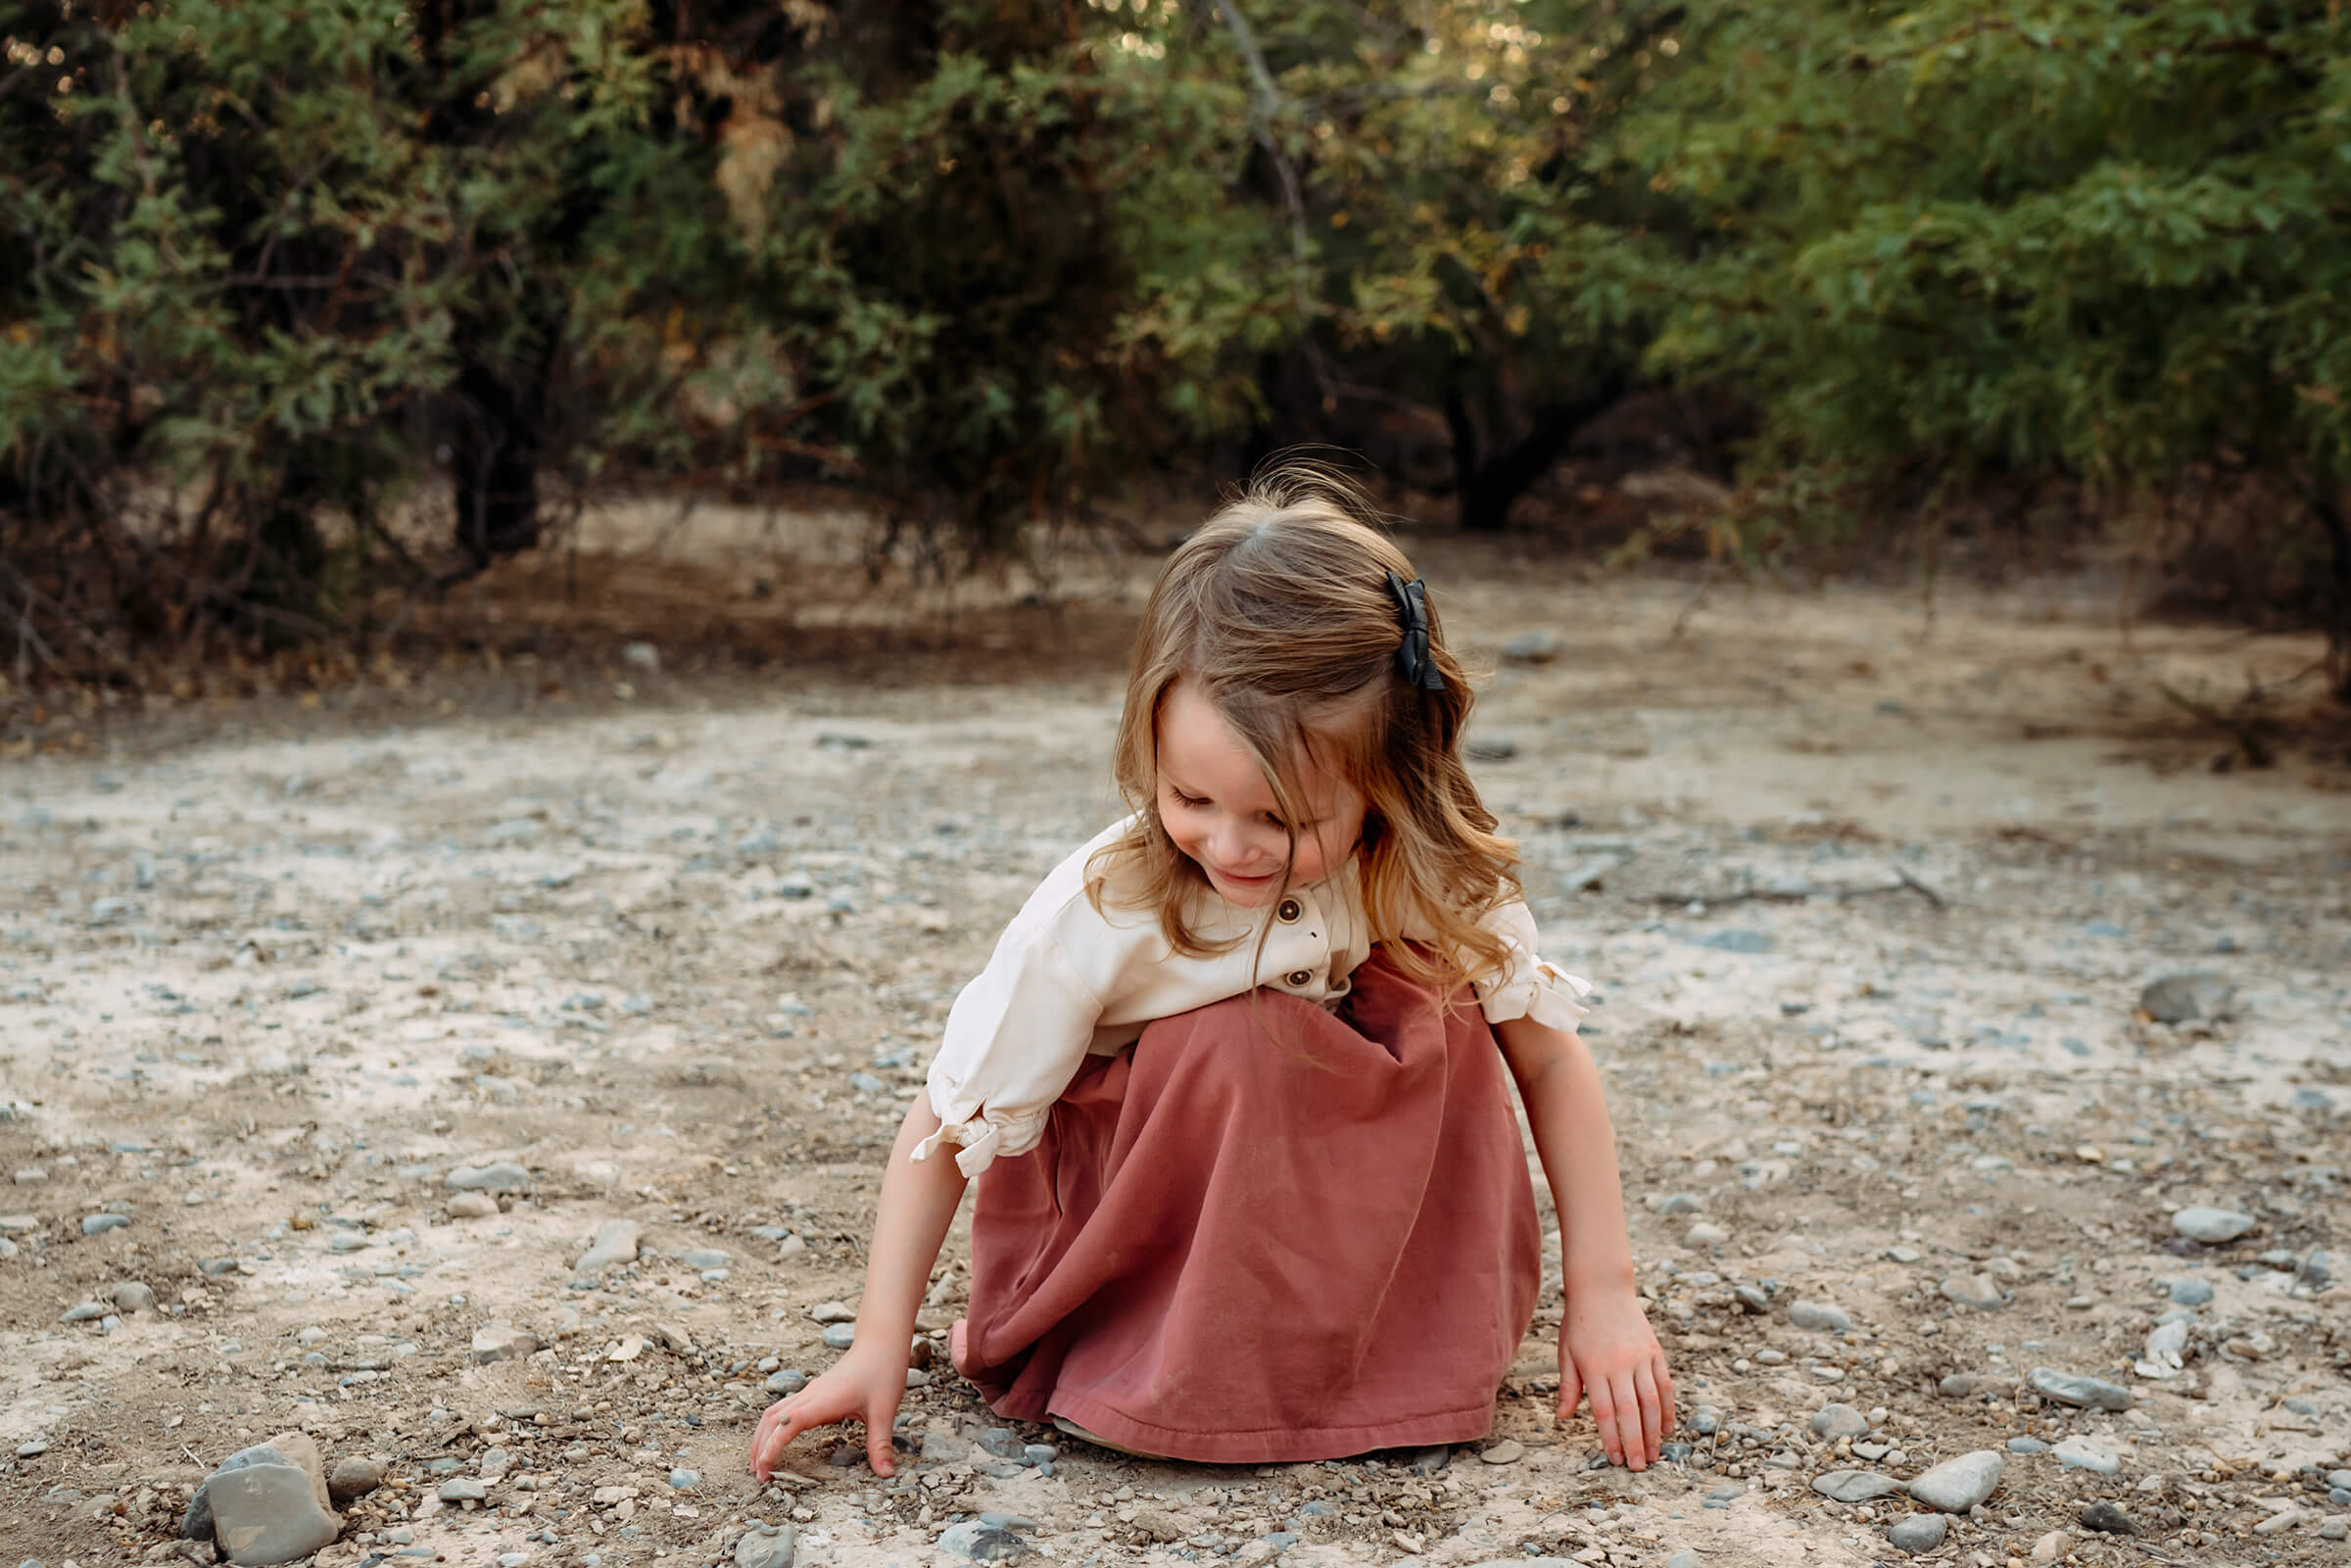 girl playing in the dirt